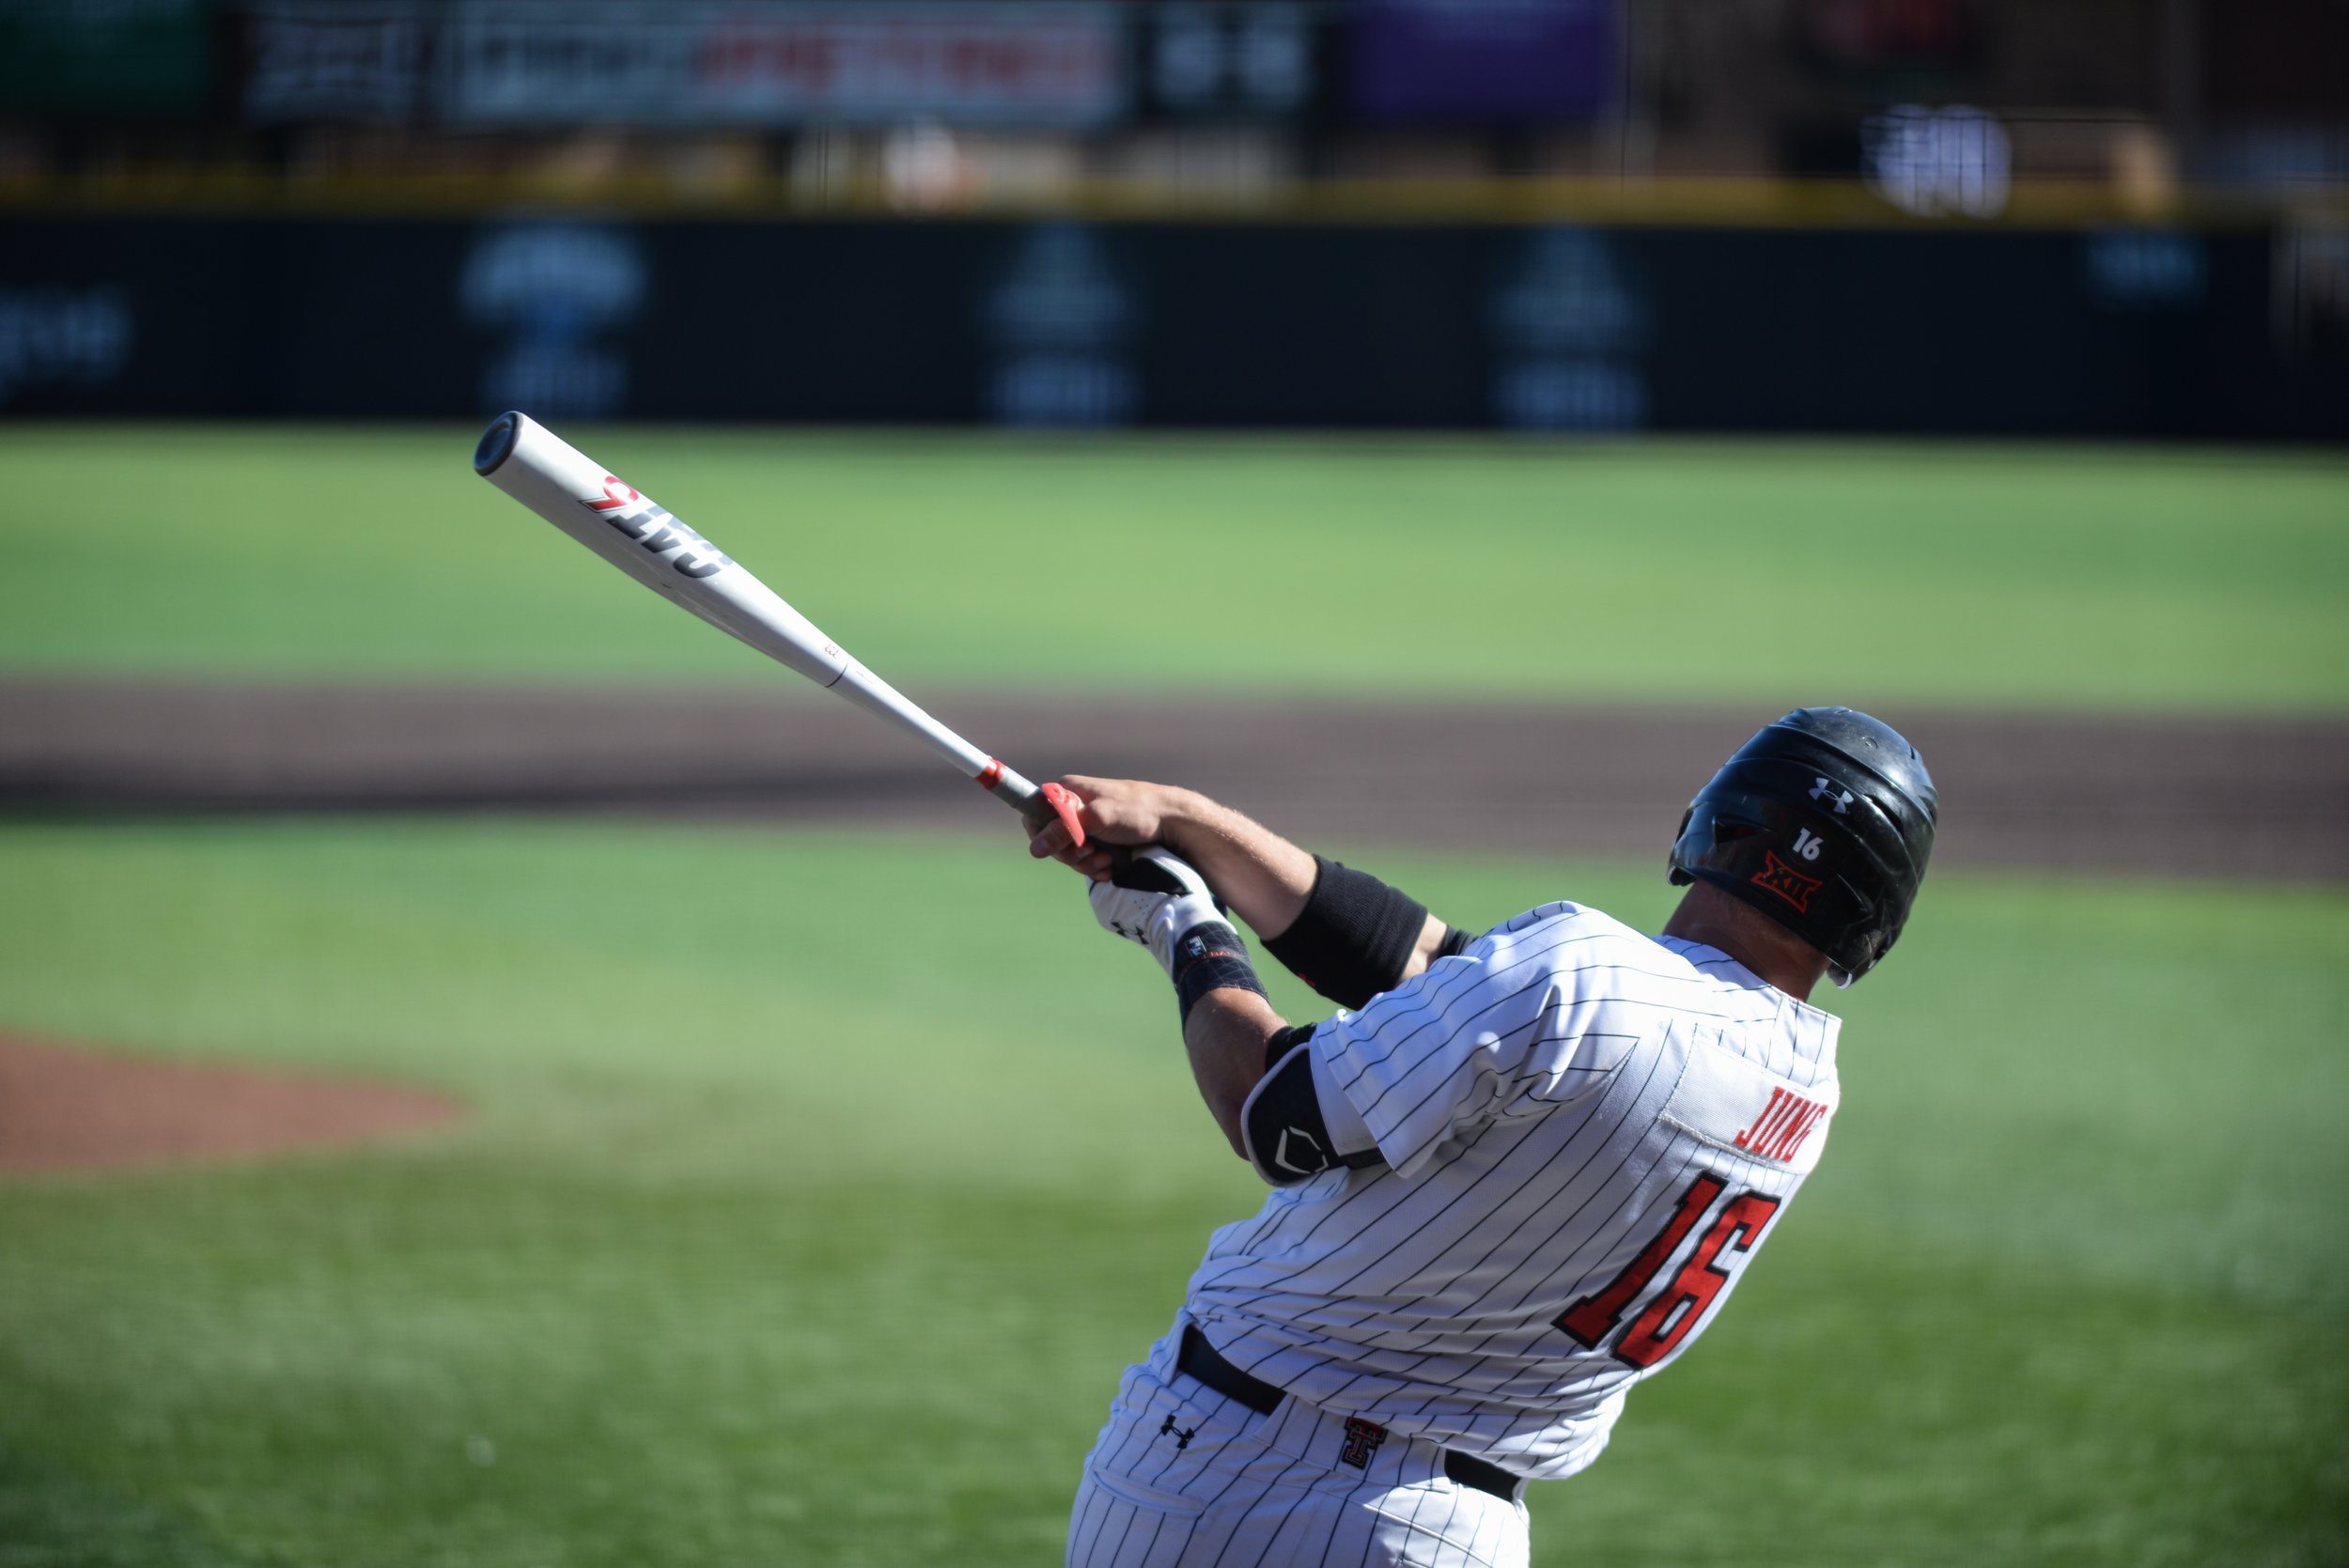  Texas Tech's Josh Jung (16) hits a base run after being walked the previous times he went to plate during the third game of the series against Kentucky Sunday, Feb. 24, 2019 at Dan Law Field at Rip Griffin Park. Texas Tech defeated Kentucky 19-4 and